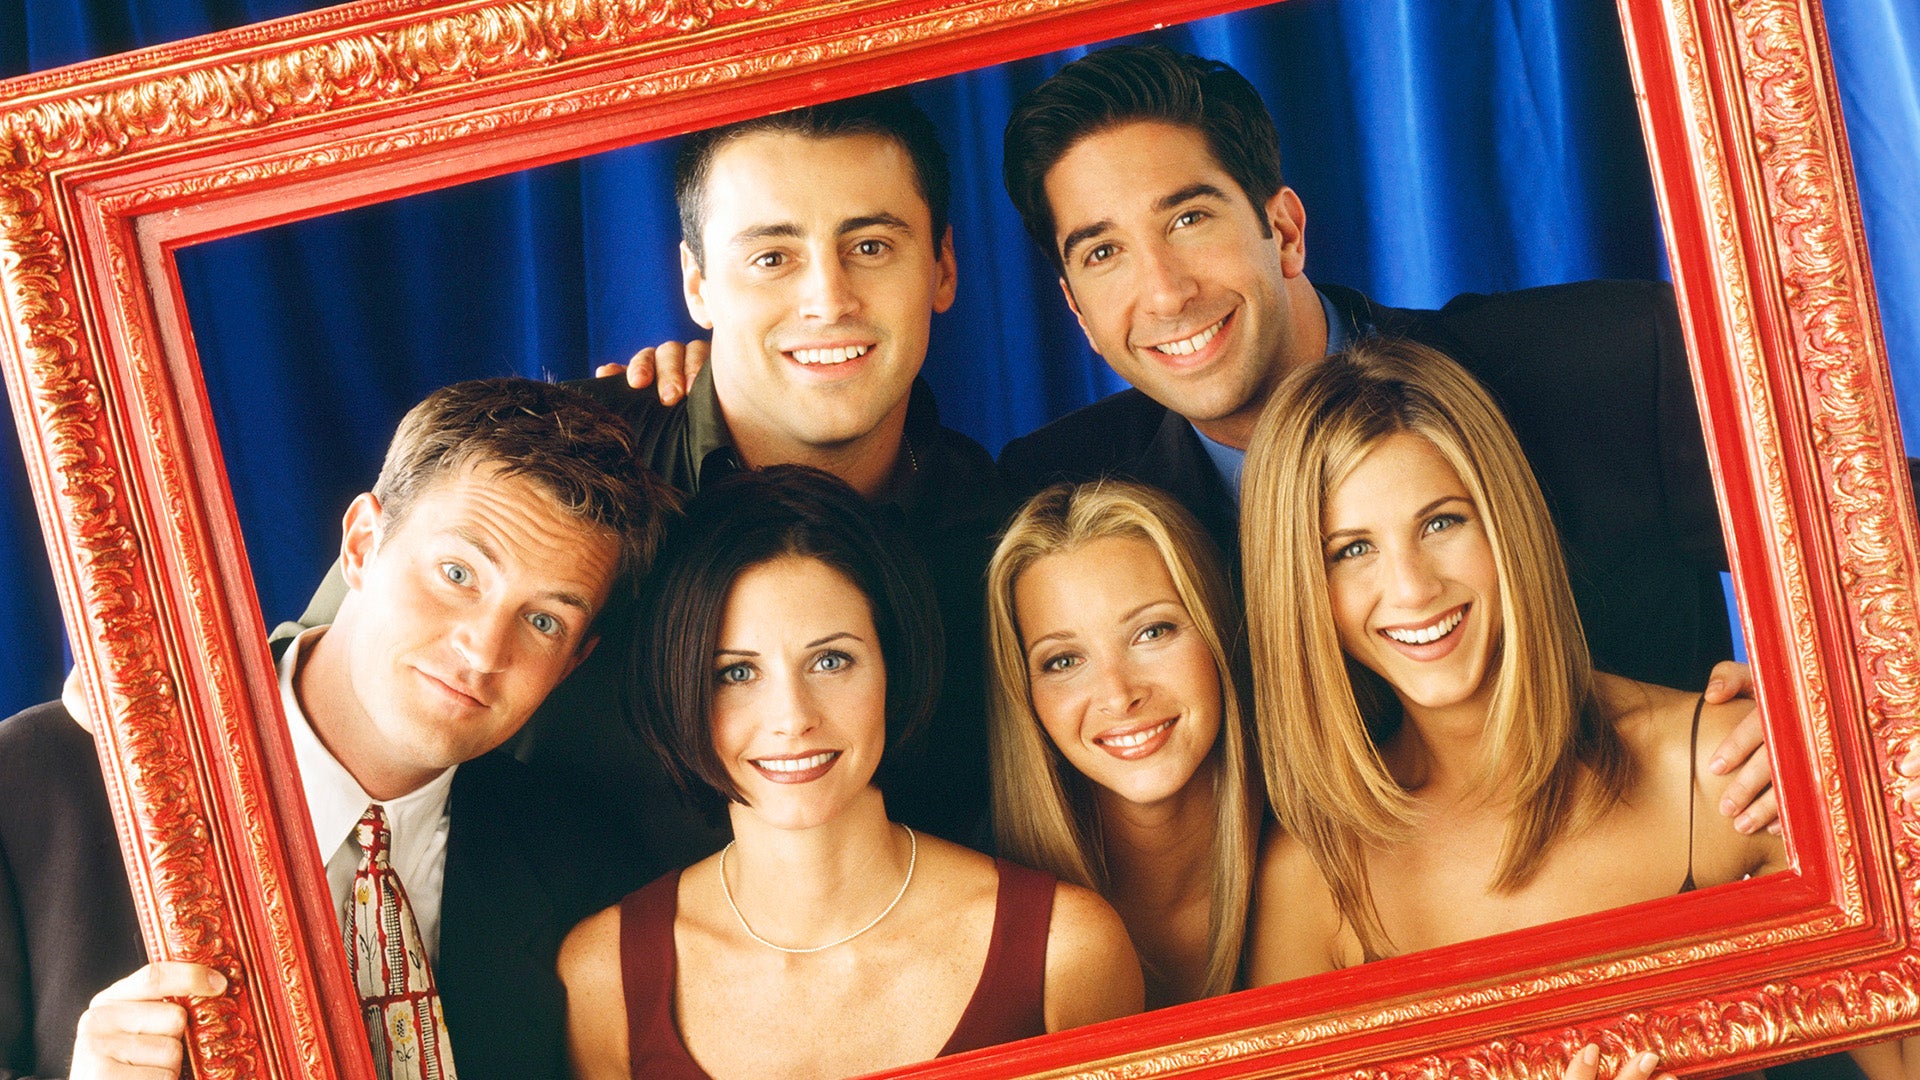 'Friends' | Inside the Iconic Sitcom's Lasting Legacy: Rare Interviews, Bloopers and More!